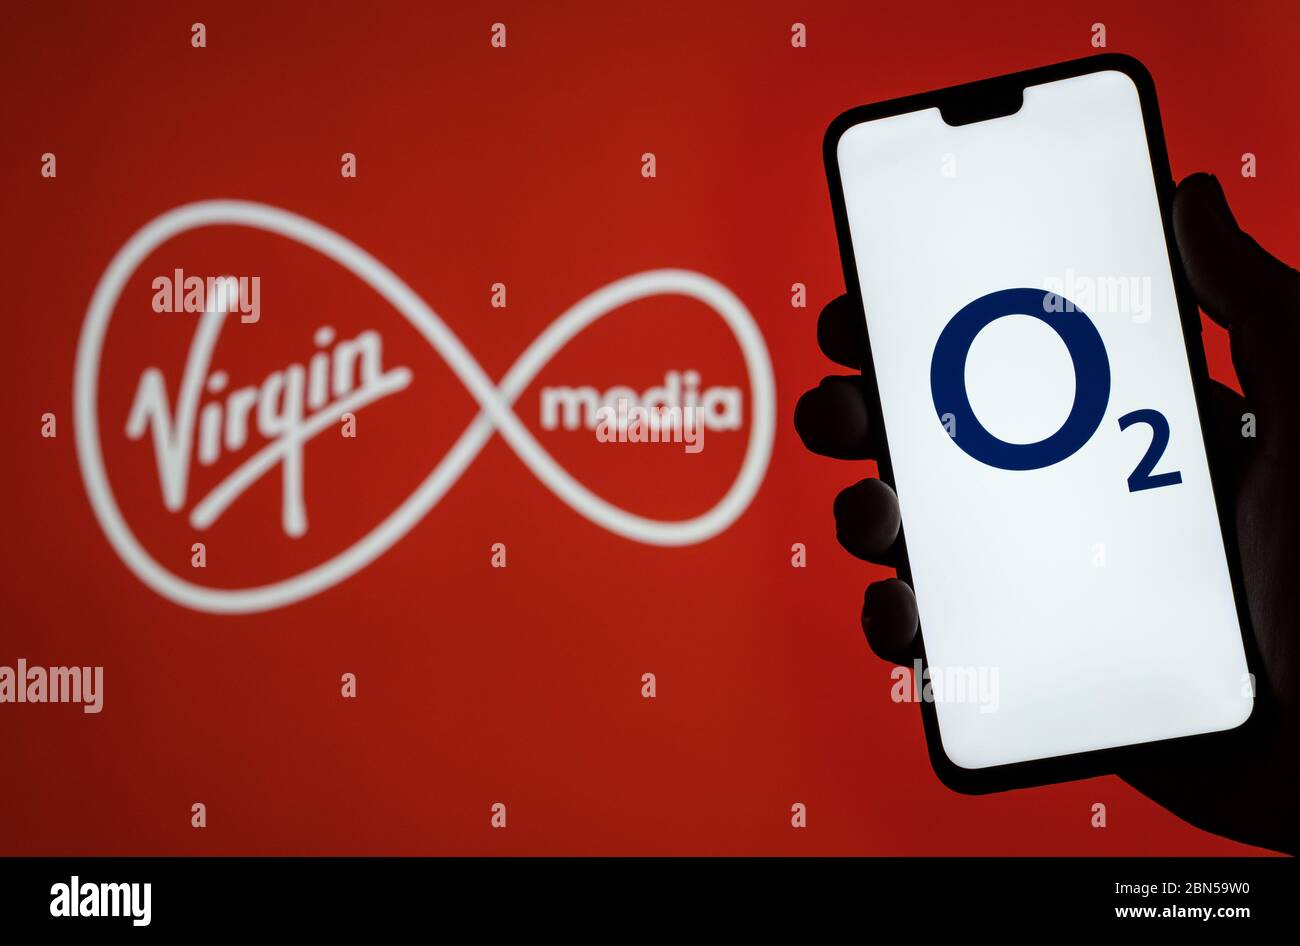 Stone / United Kingdom - May 12 2020: O2 Telefonica logo on smartphone screen hold in hand and Virgin Media logo on blurred background. Concept for Vi Stock Photo